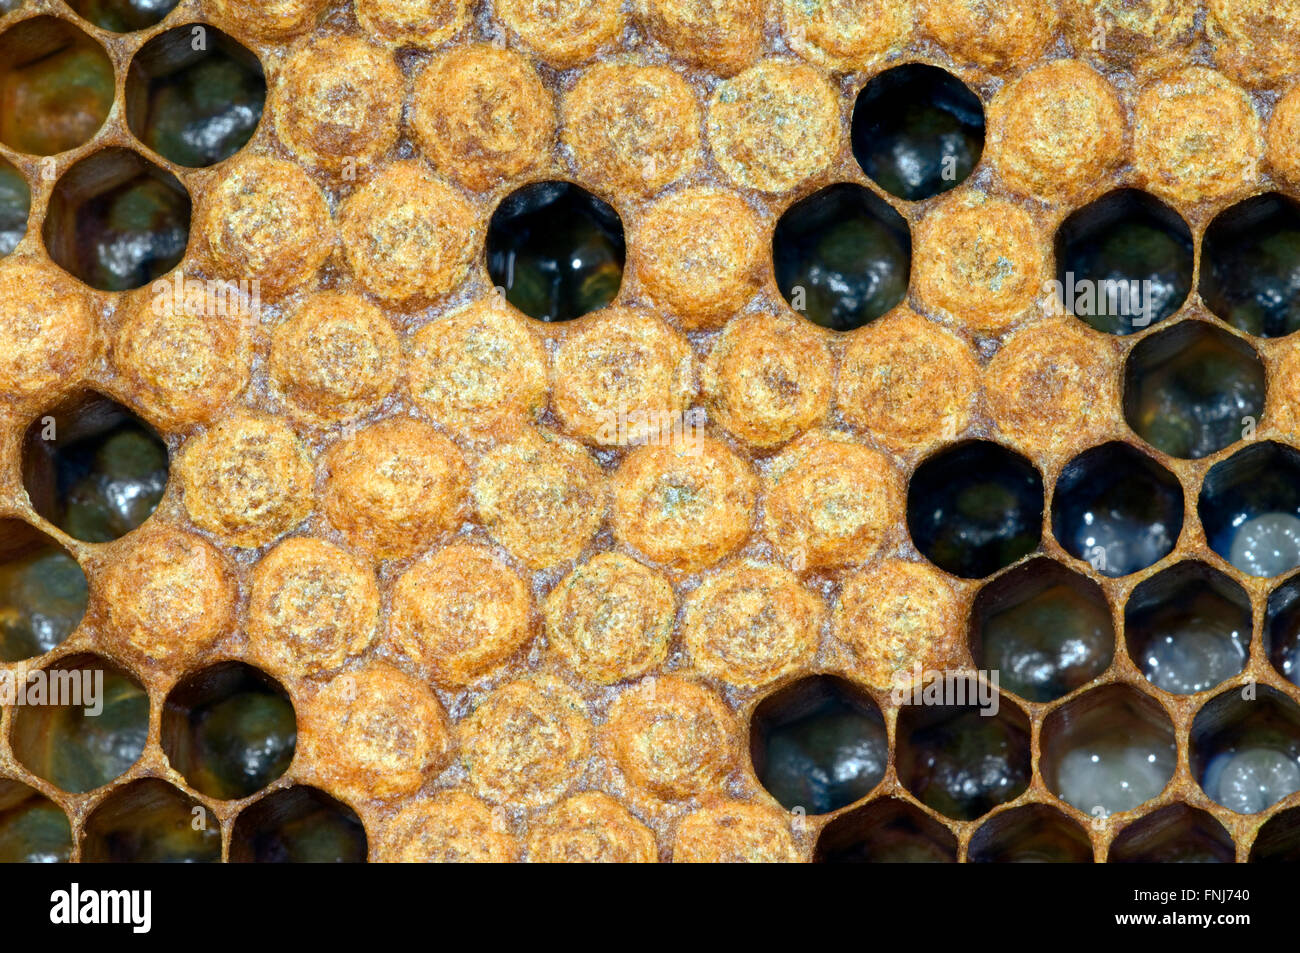 Honey bee (Apis mellifera) comb with capped and open cells containing honeybee larvae Stock Photo